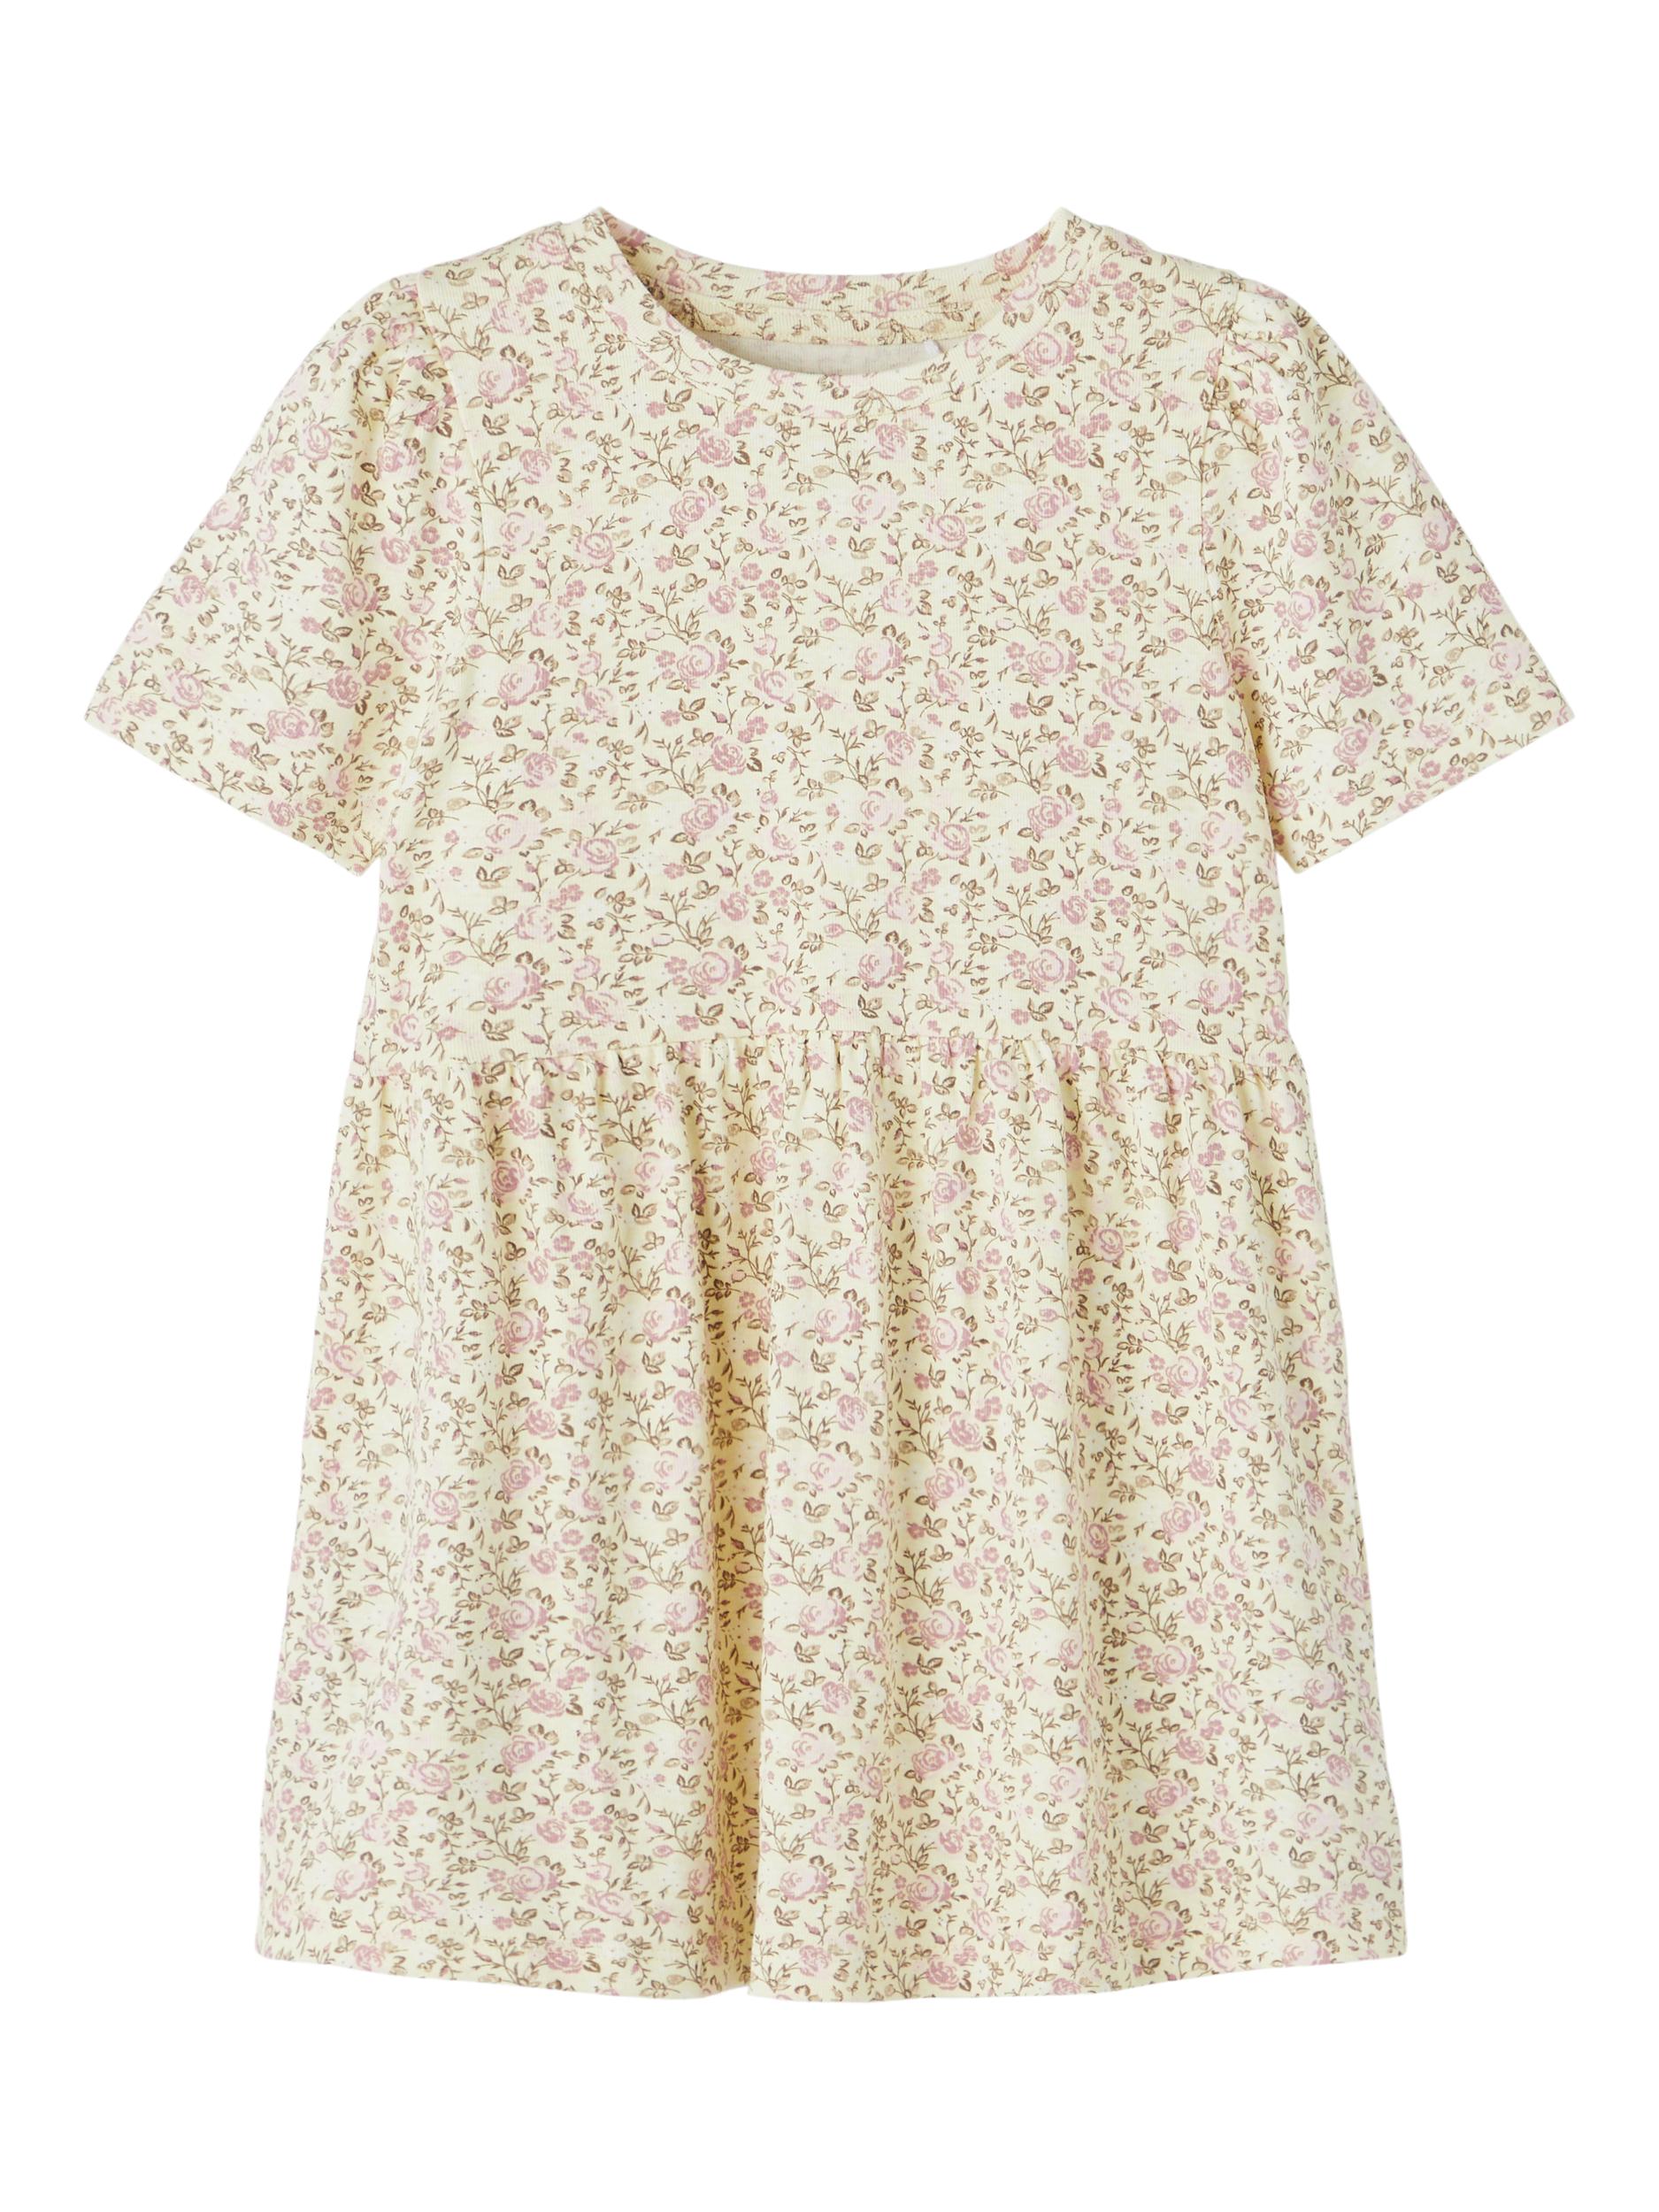 Justice Short Sleeve Dress - Lemon Icing Front View